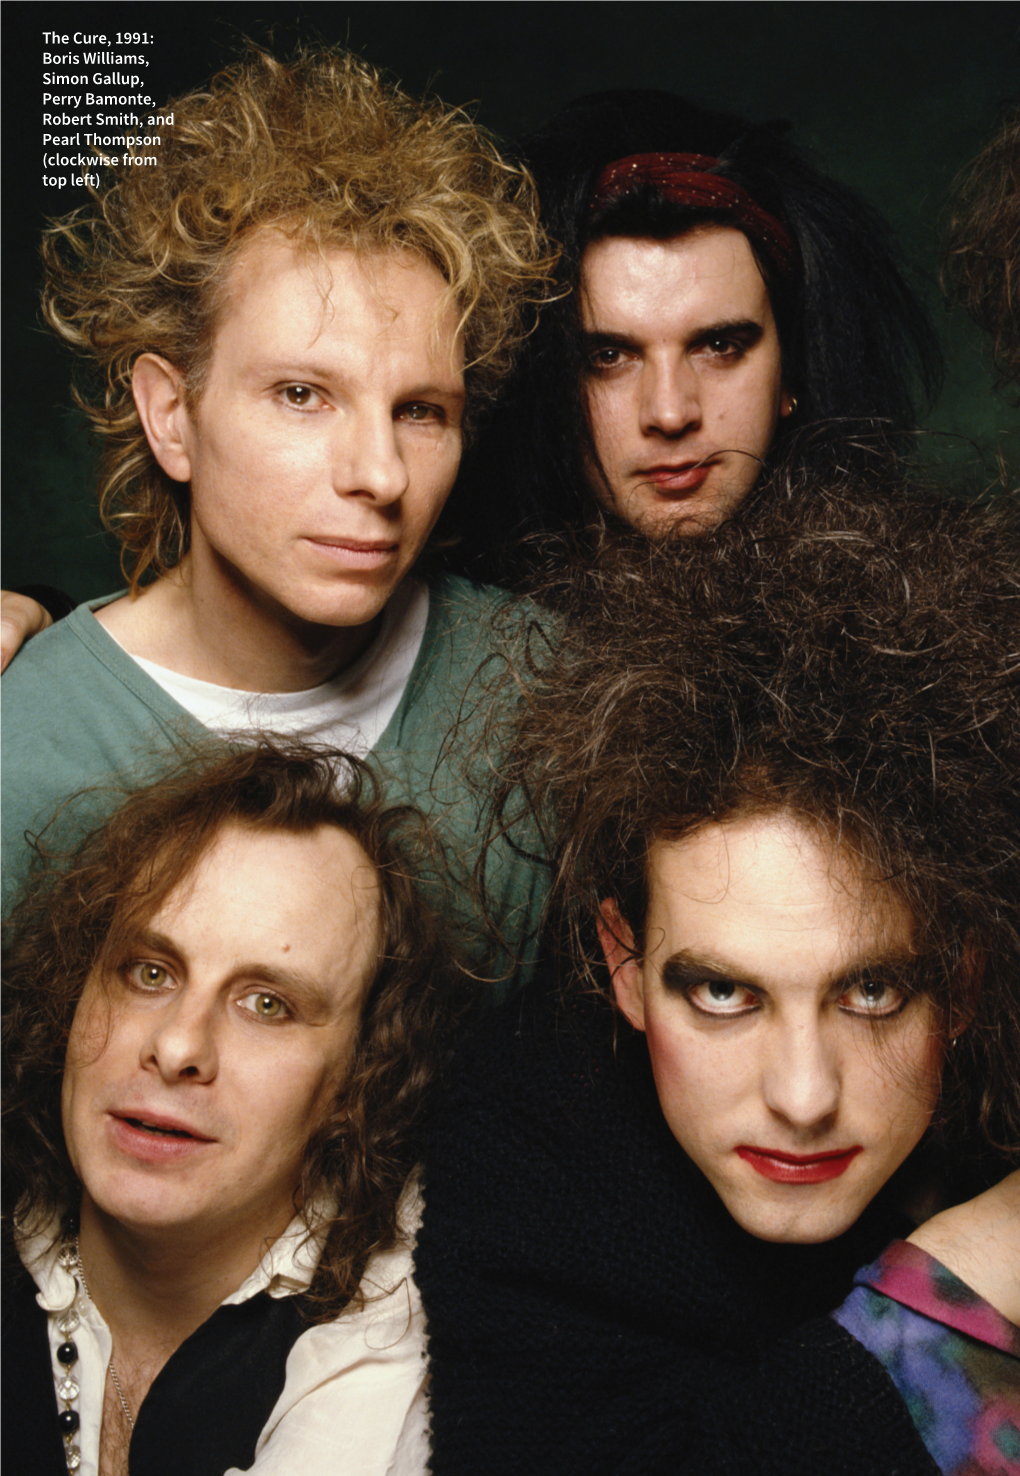 The Cure, 1991: Boris Williams, Simon Gallup, Perry Bamonte, Robert Smith, and Pearl Thompson (Clockwise from Top Left)